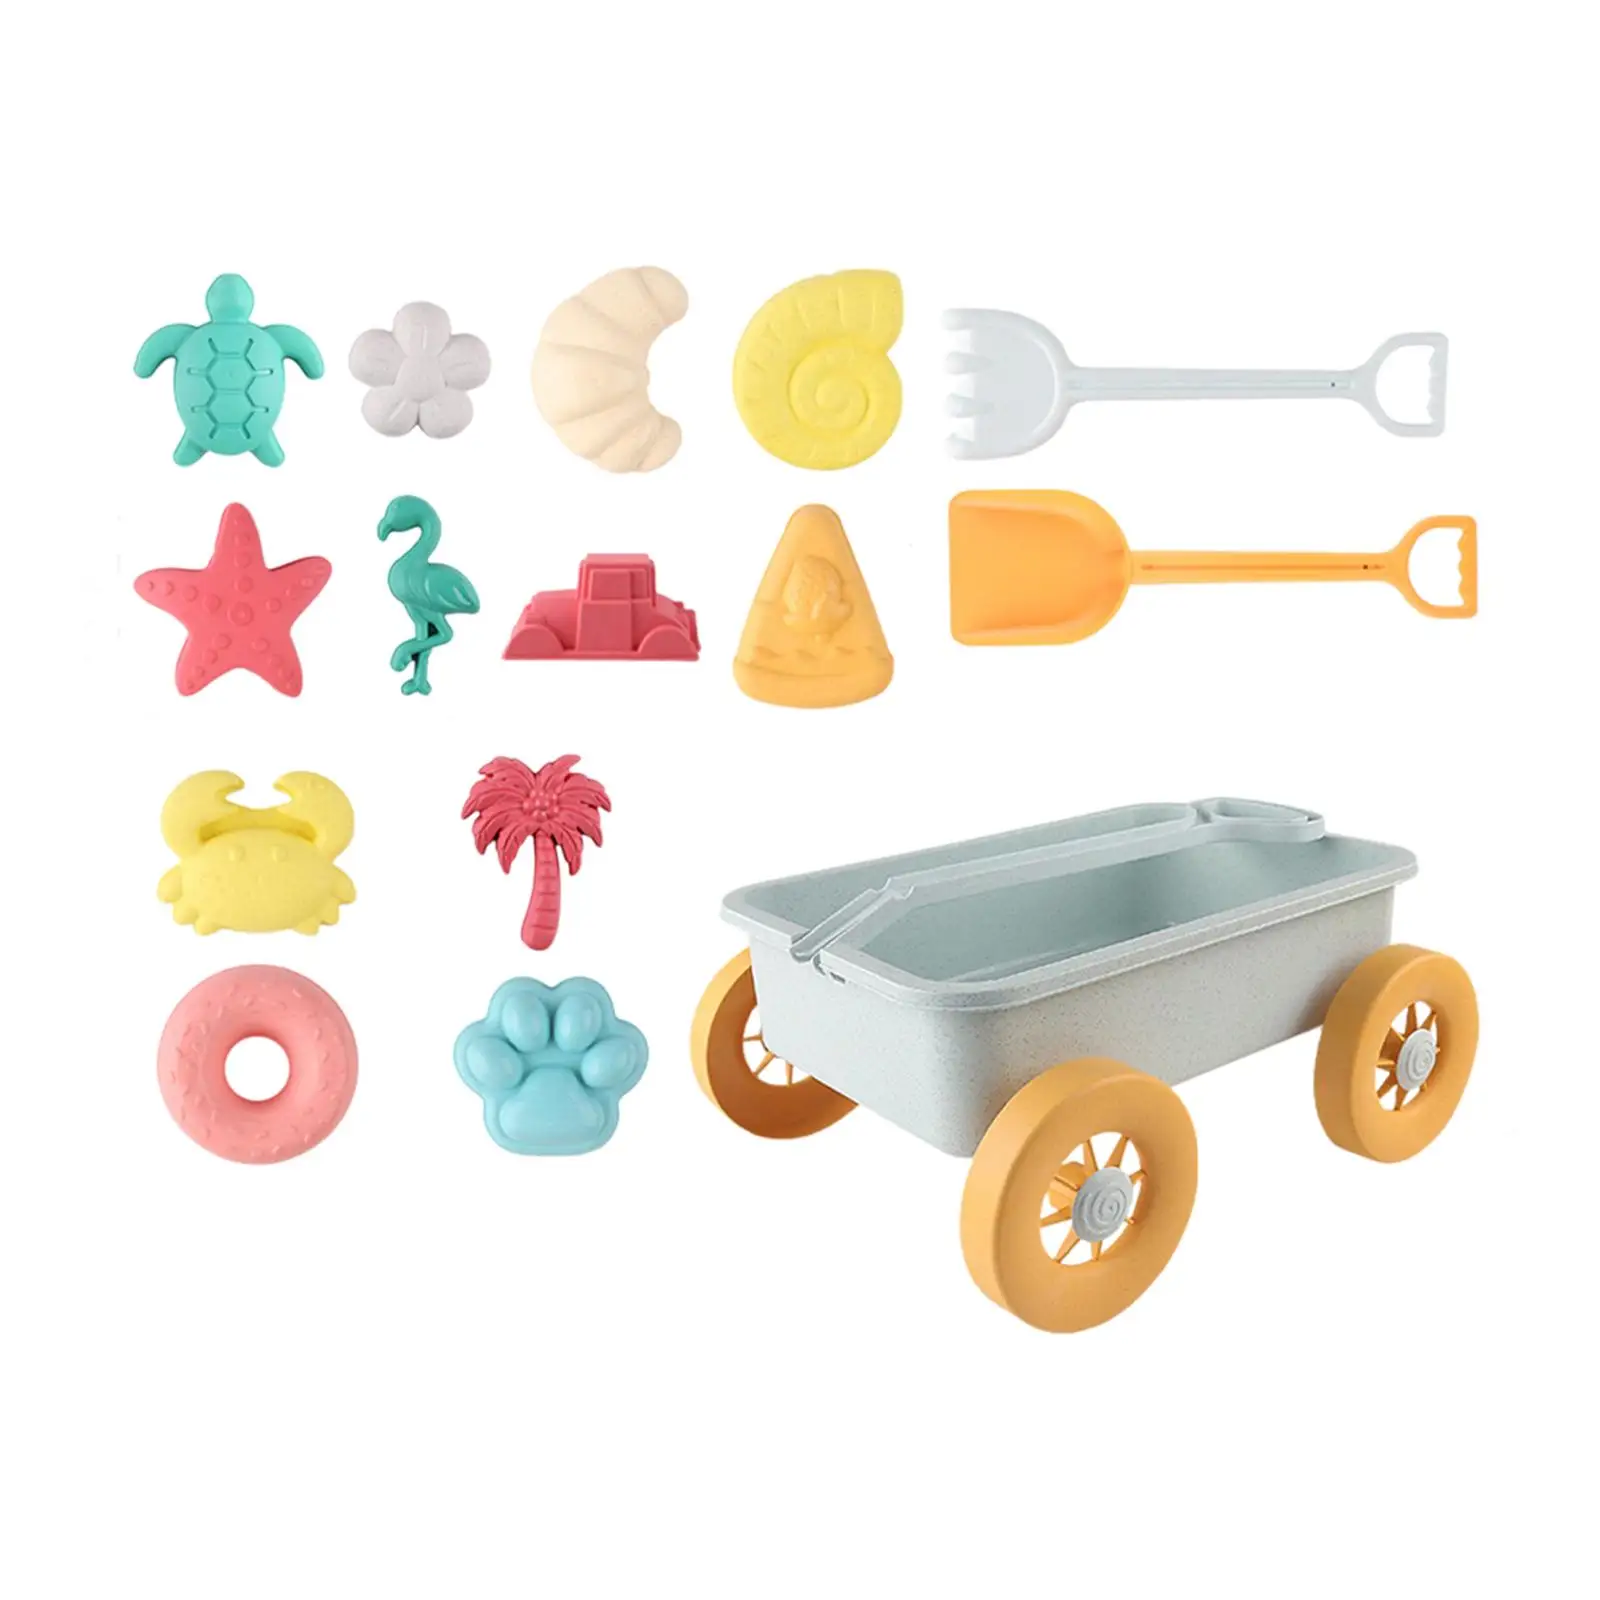 

15 Pieces Beach Toys Sand Set,Travel Toys,Includes Sand Models,Petals,Pushcart,Donut,,Turtle,Palm Tree,Beach Toys for Kids